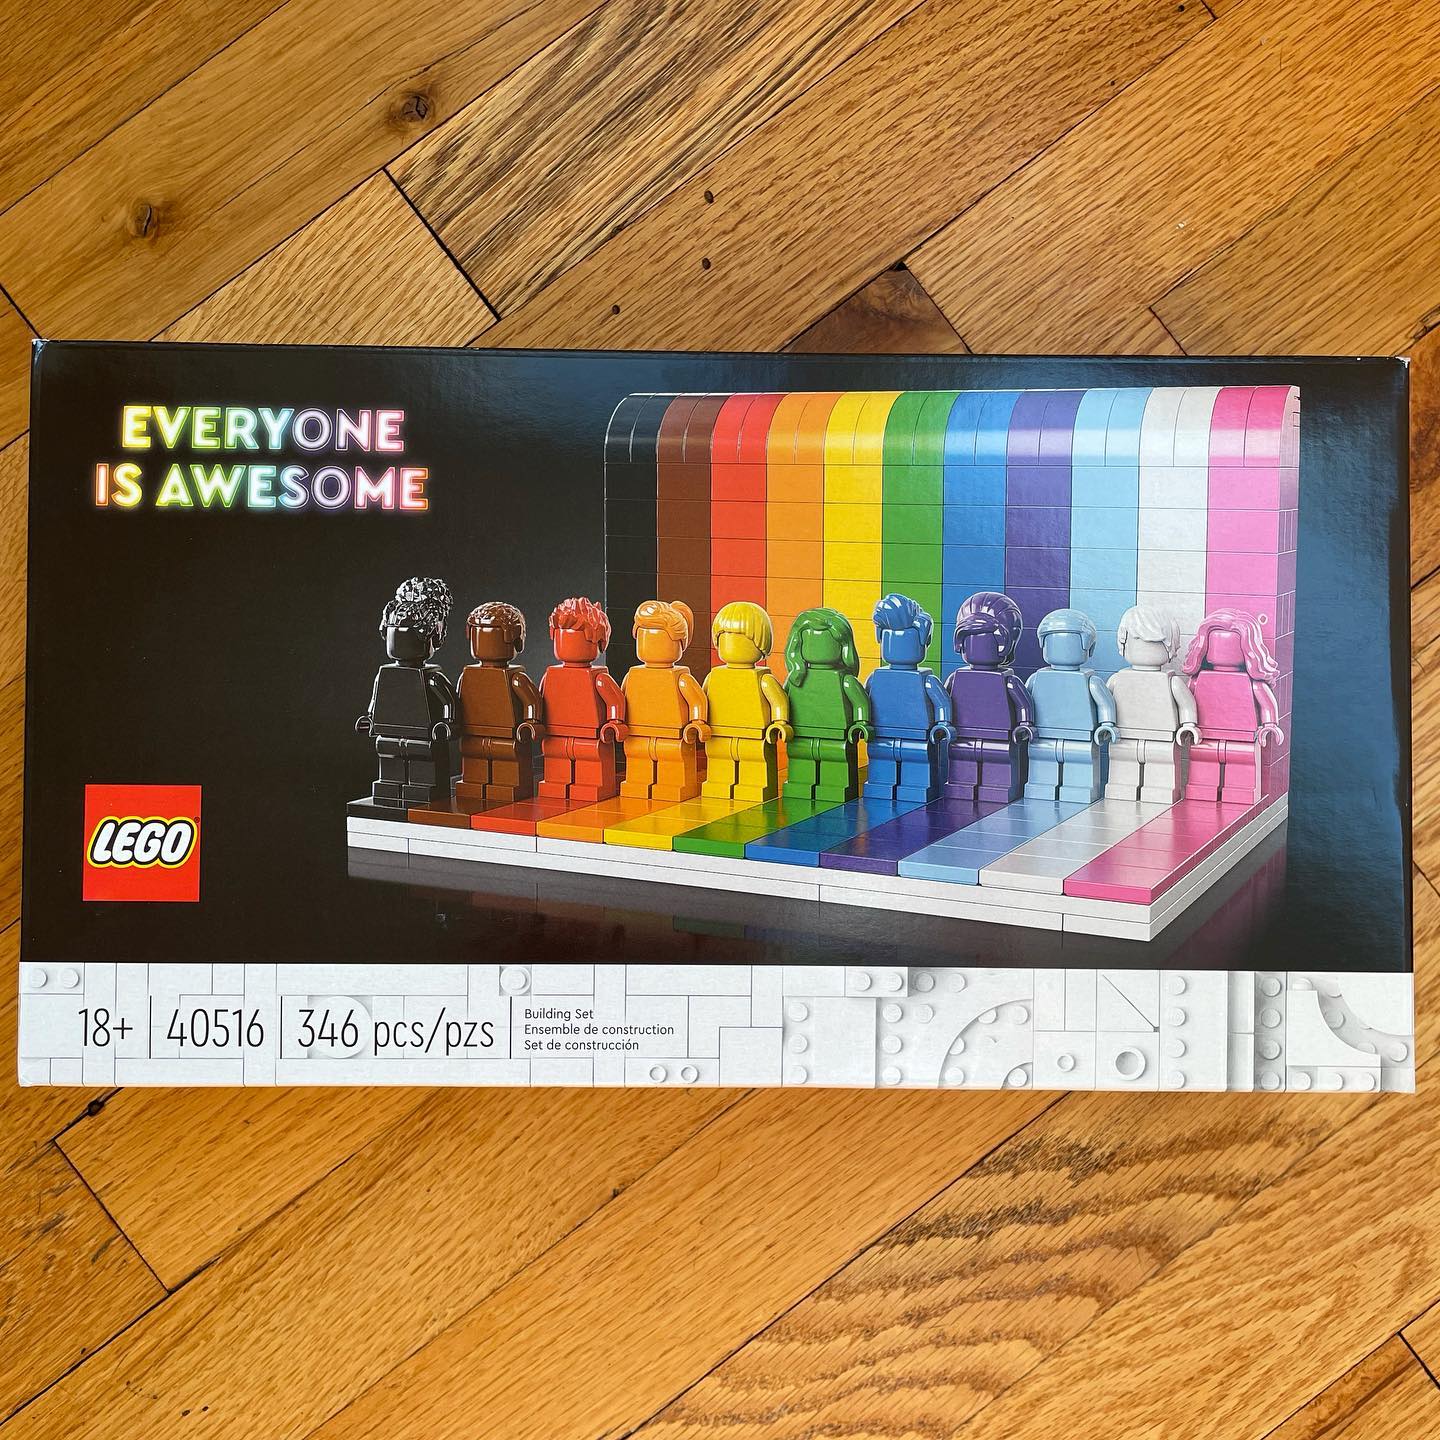 “Everyone is awesome” is a mindset that needs daily effort. Embrace the colors. Empower those whose colors have been blocked.  I’m looking forward to this @lego build!